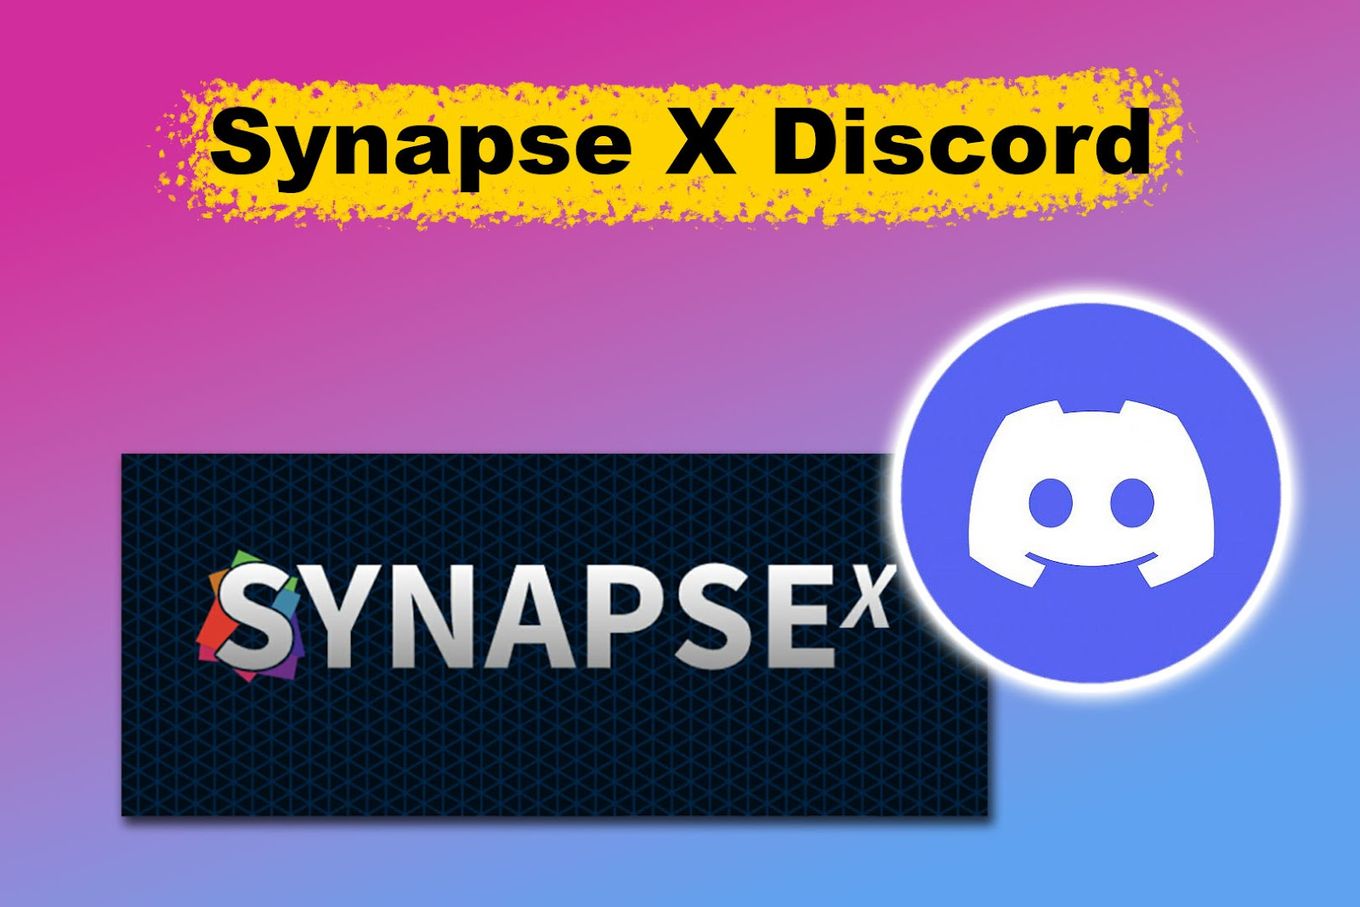 Discord server in bio where you can get synapse x #viral #fyp #fy